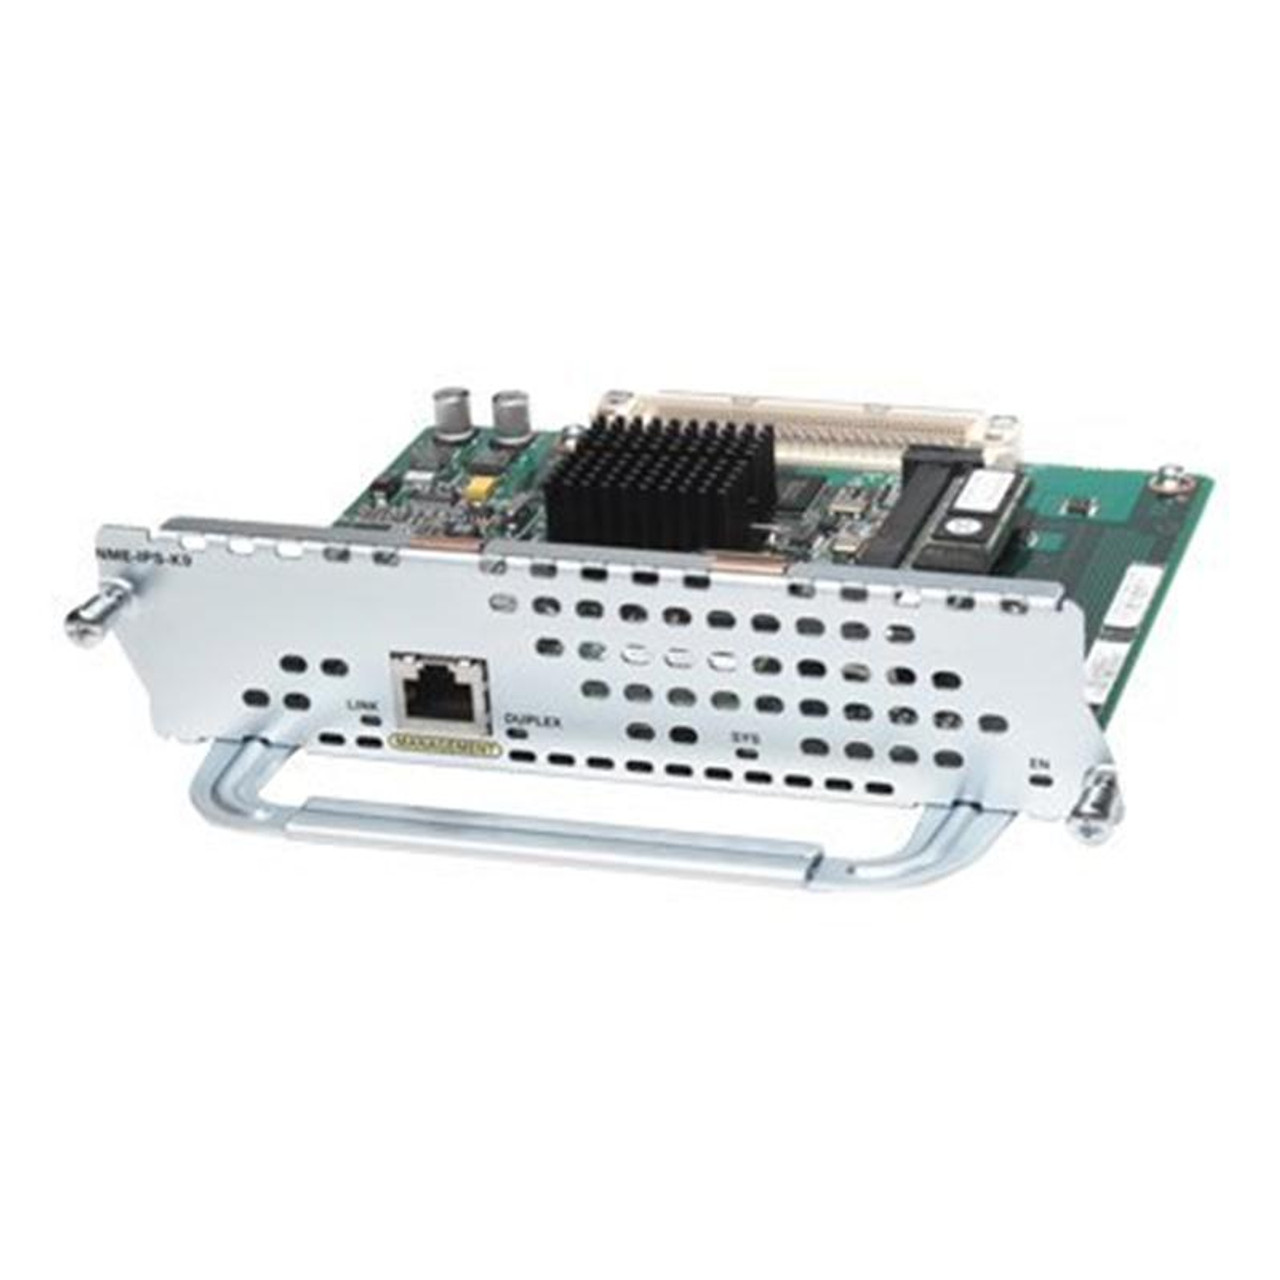 NME-IPS-K9= Cisco Intrusion Prevention System Network Module 1 x 10/100/1000Base-T